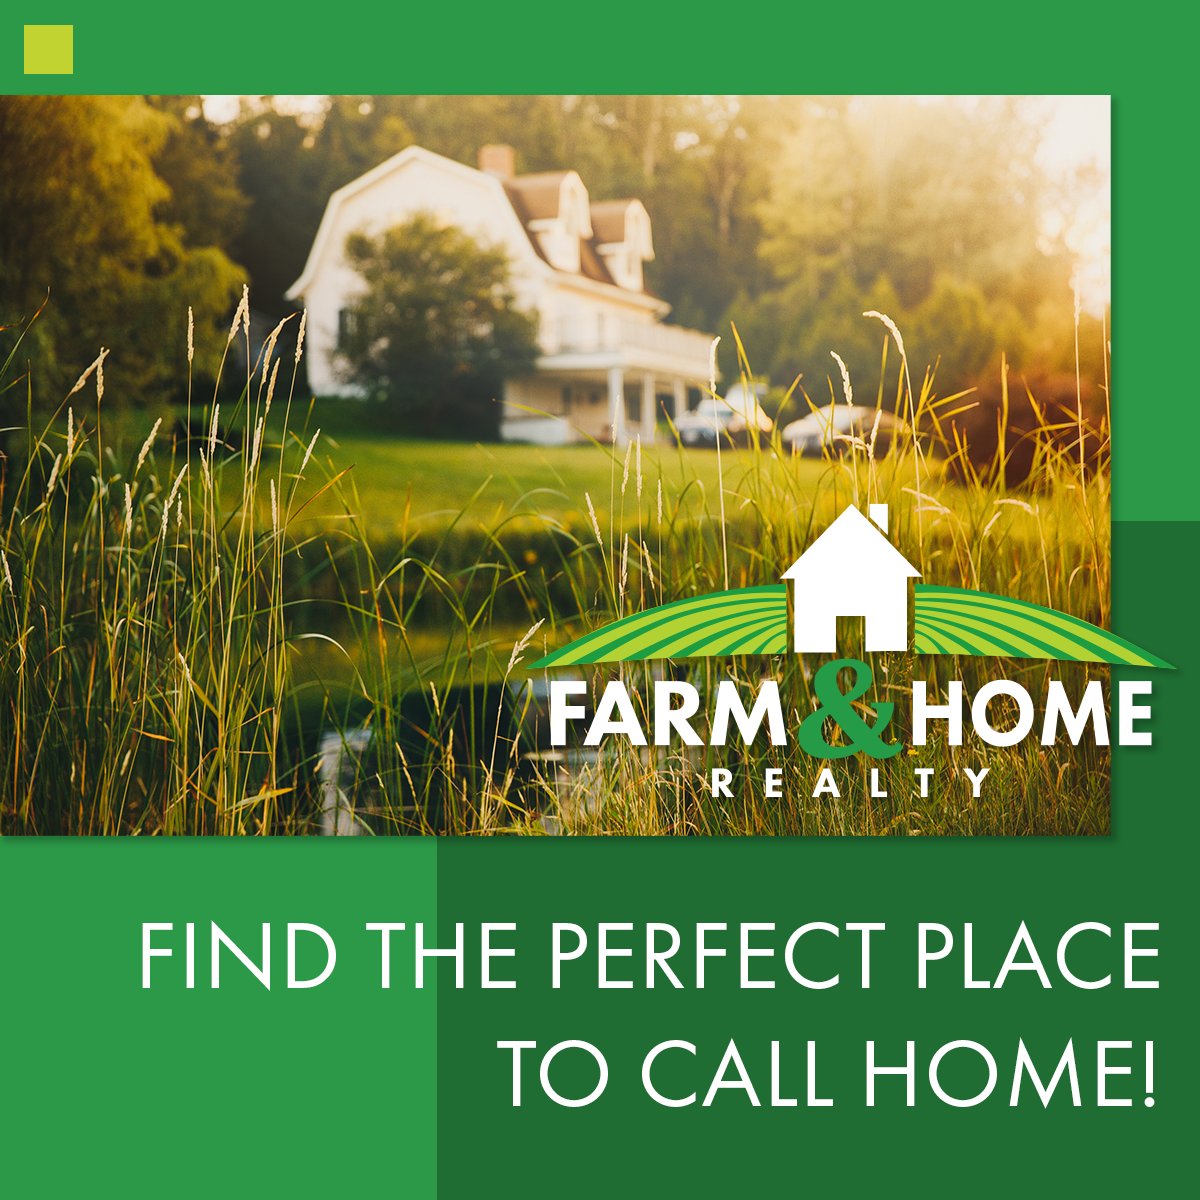 Farm & Home Realty takes pride in helping the wonderful people of McNairy and surrounding counties find their dream properties.

Call us today at 731-645-4344.

farmandhometn.com

#FarmAndHomeRealty #countryliving #property #investment #modernfarmhouse